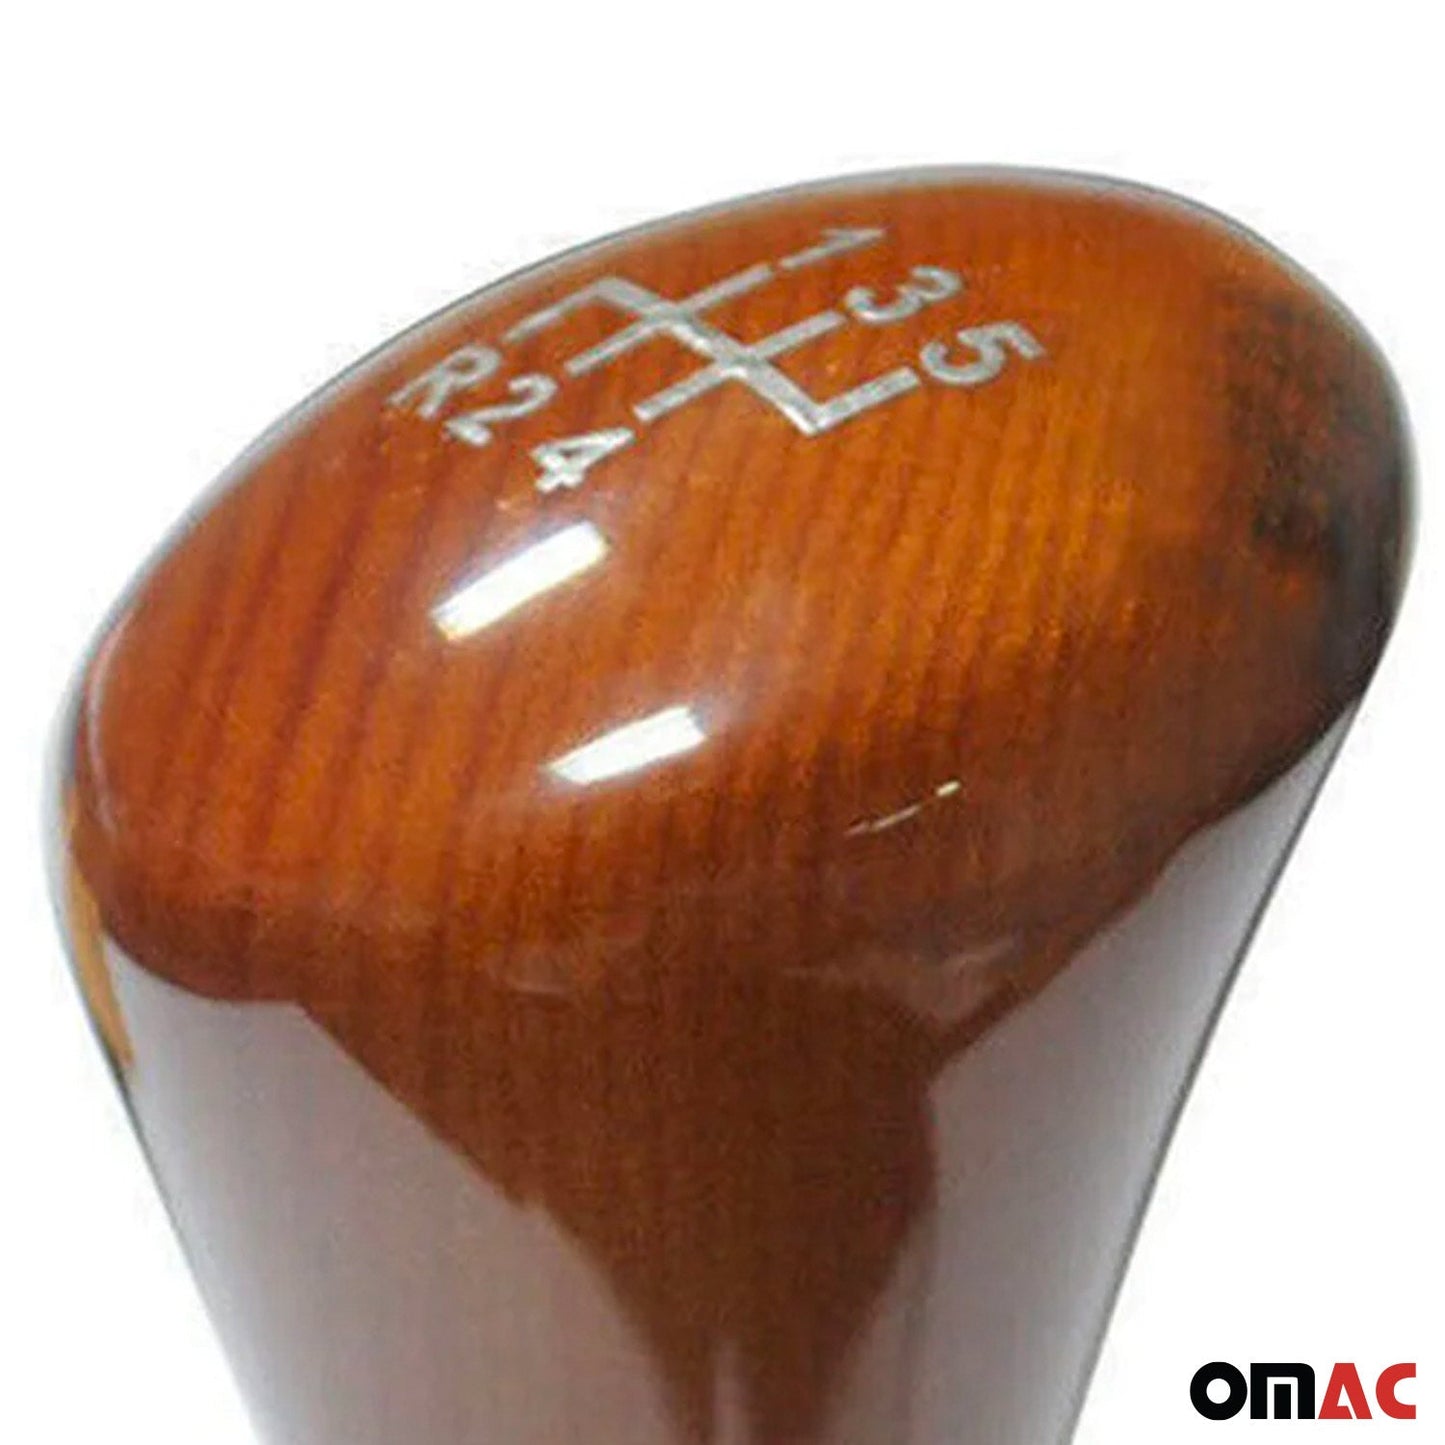 OMAC Wooden Gear Shift Shifter Knob With Numbers For Mercedes M-Class W163 1998-2005 U003662